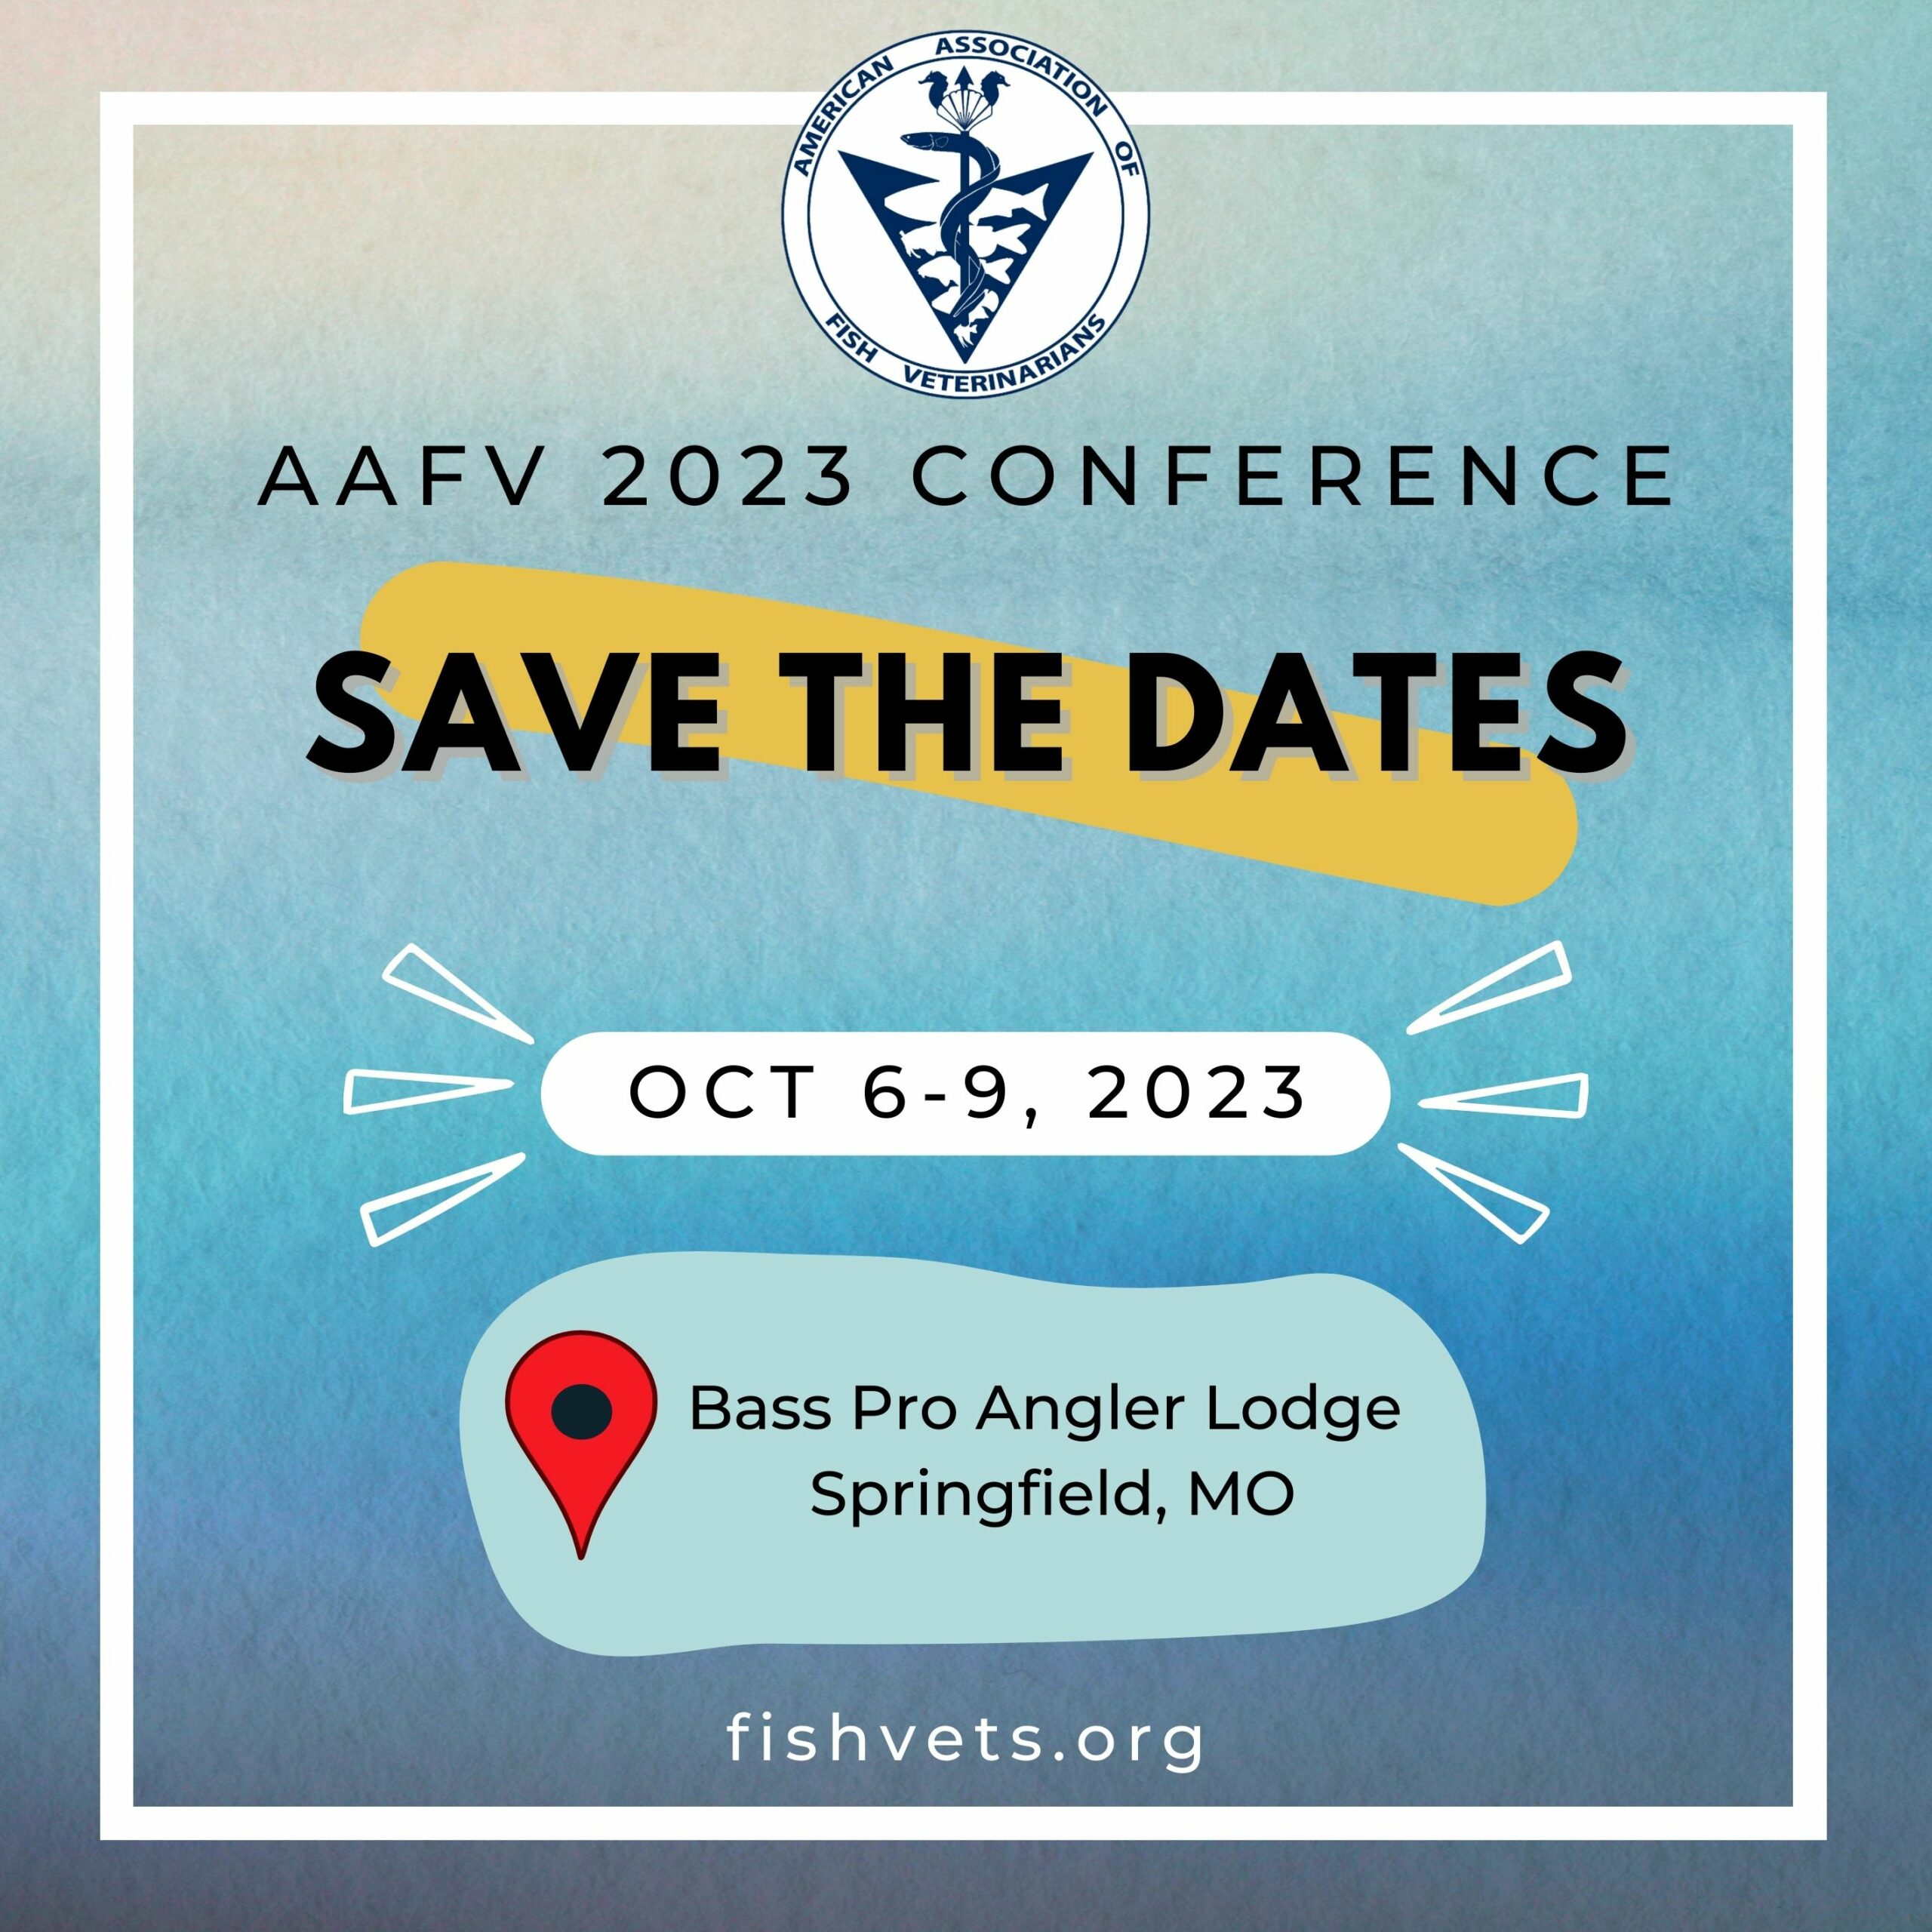 AAFV 2023 Save the Date